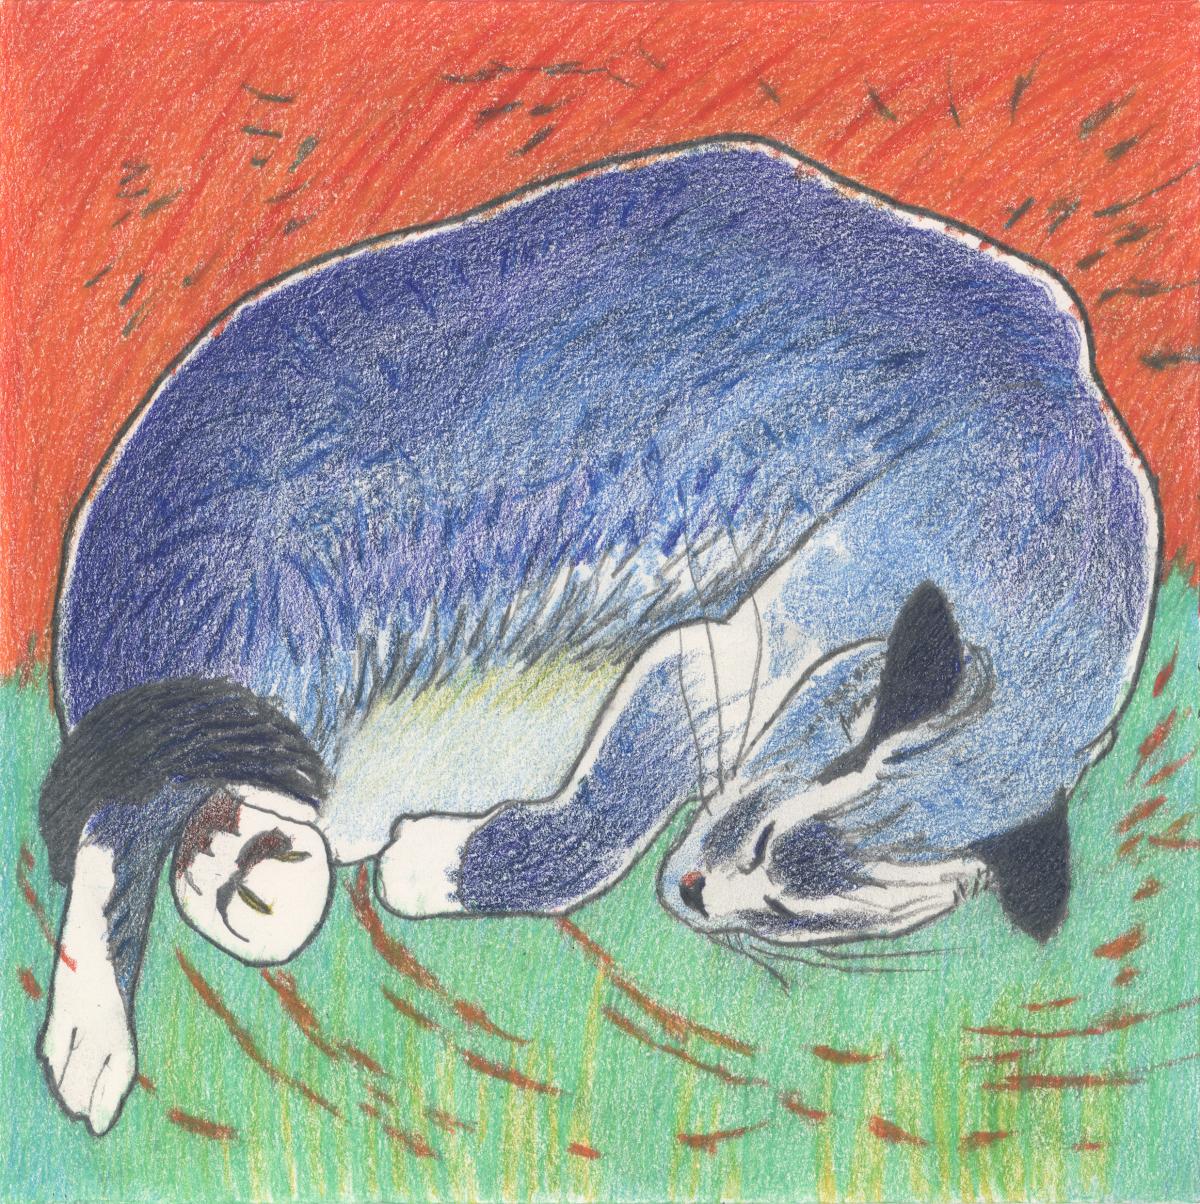 Blue Cat on Orange & Green Field - color drawing of sleeping cat by Frank Costantino